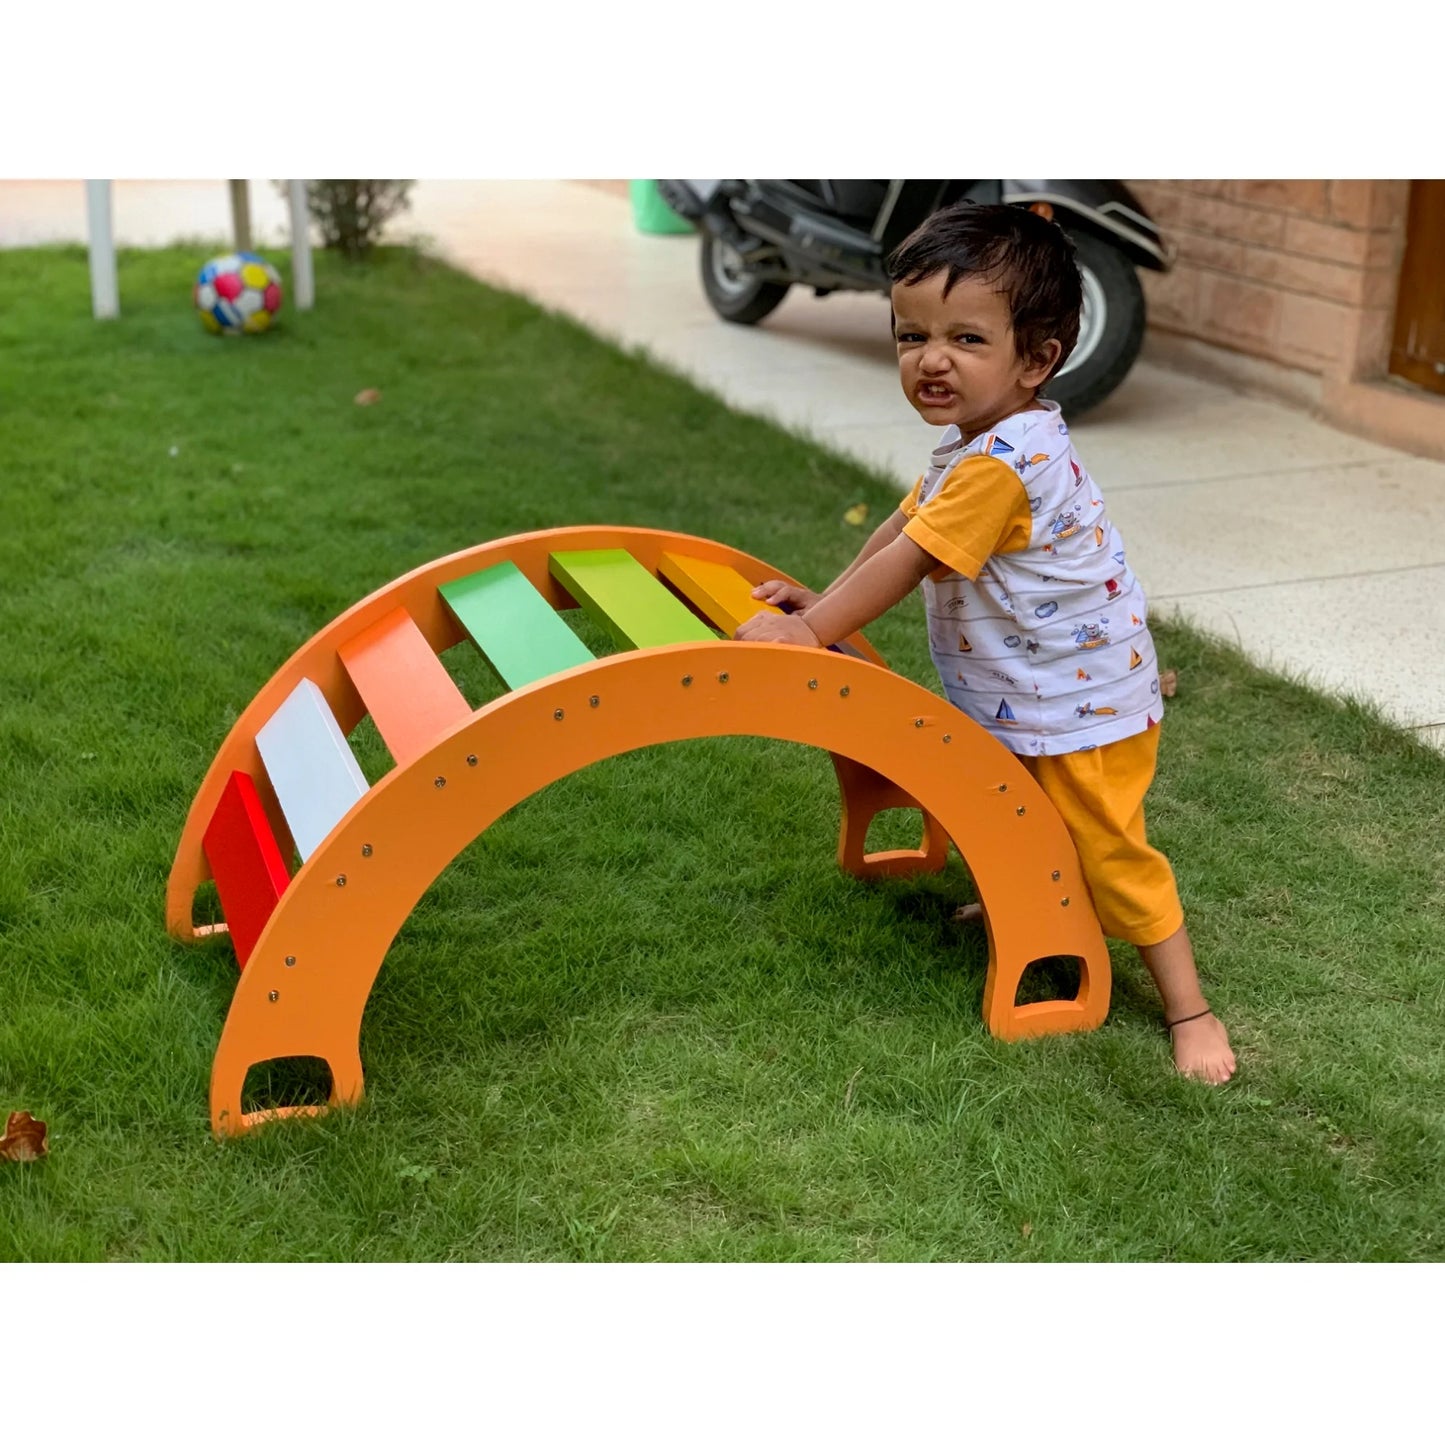 Buy Rainbow Wooden Rocker Toy - Side View - SkilloToys.com